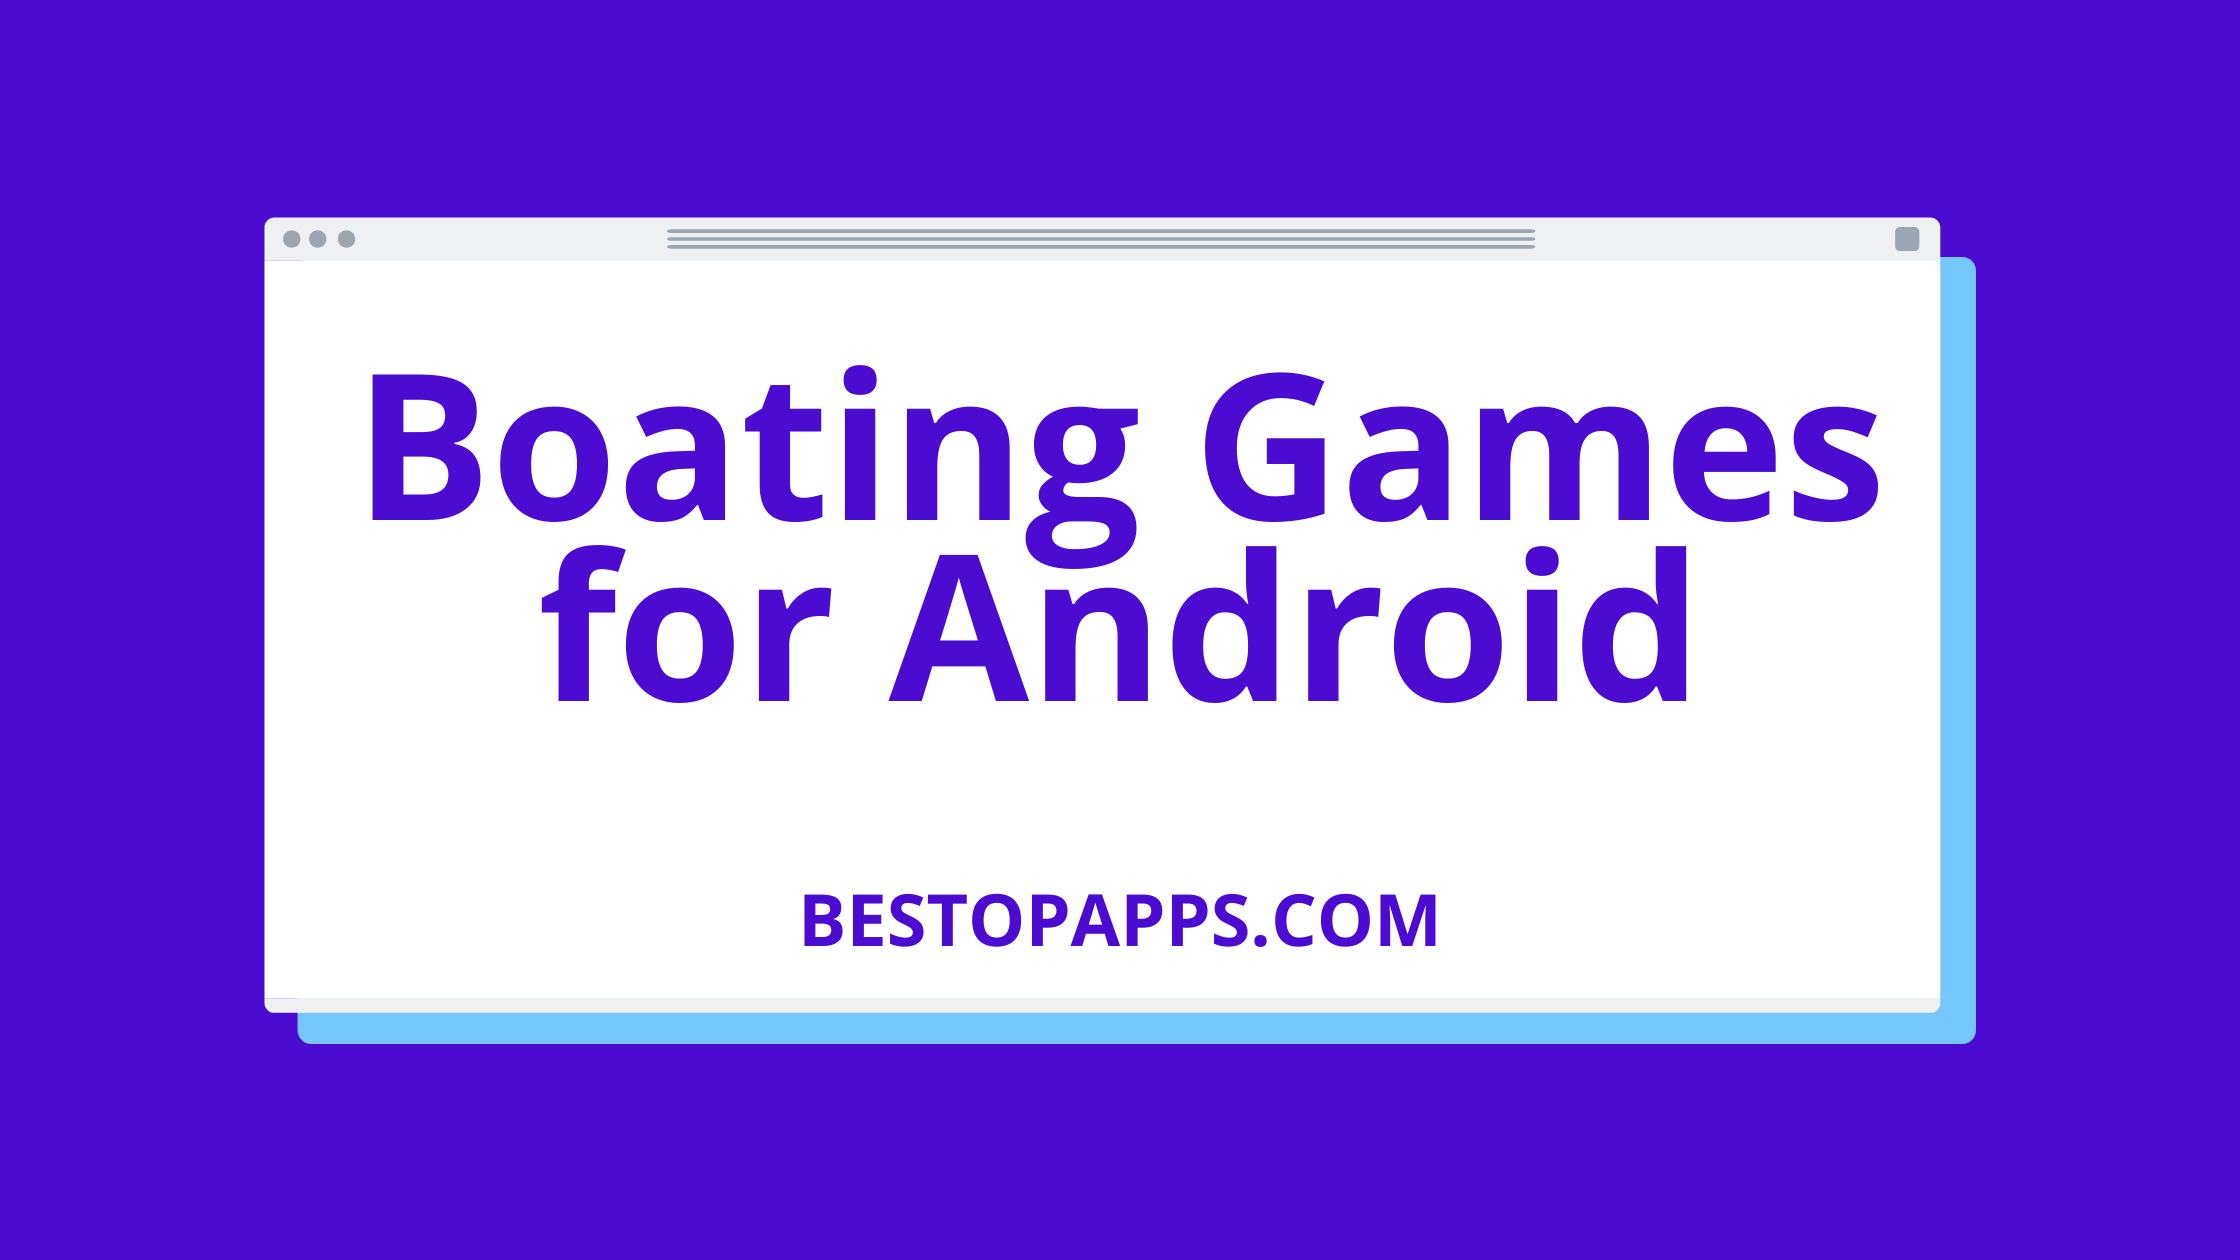 Boating Games for Android